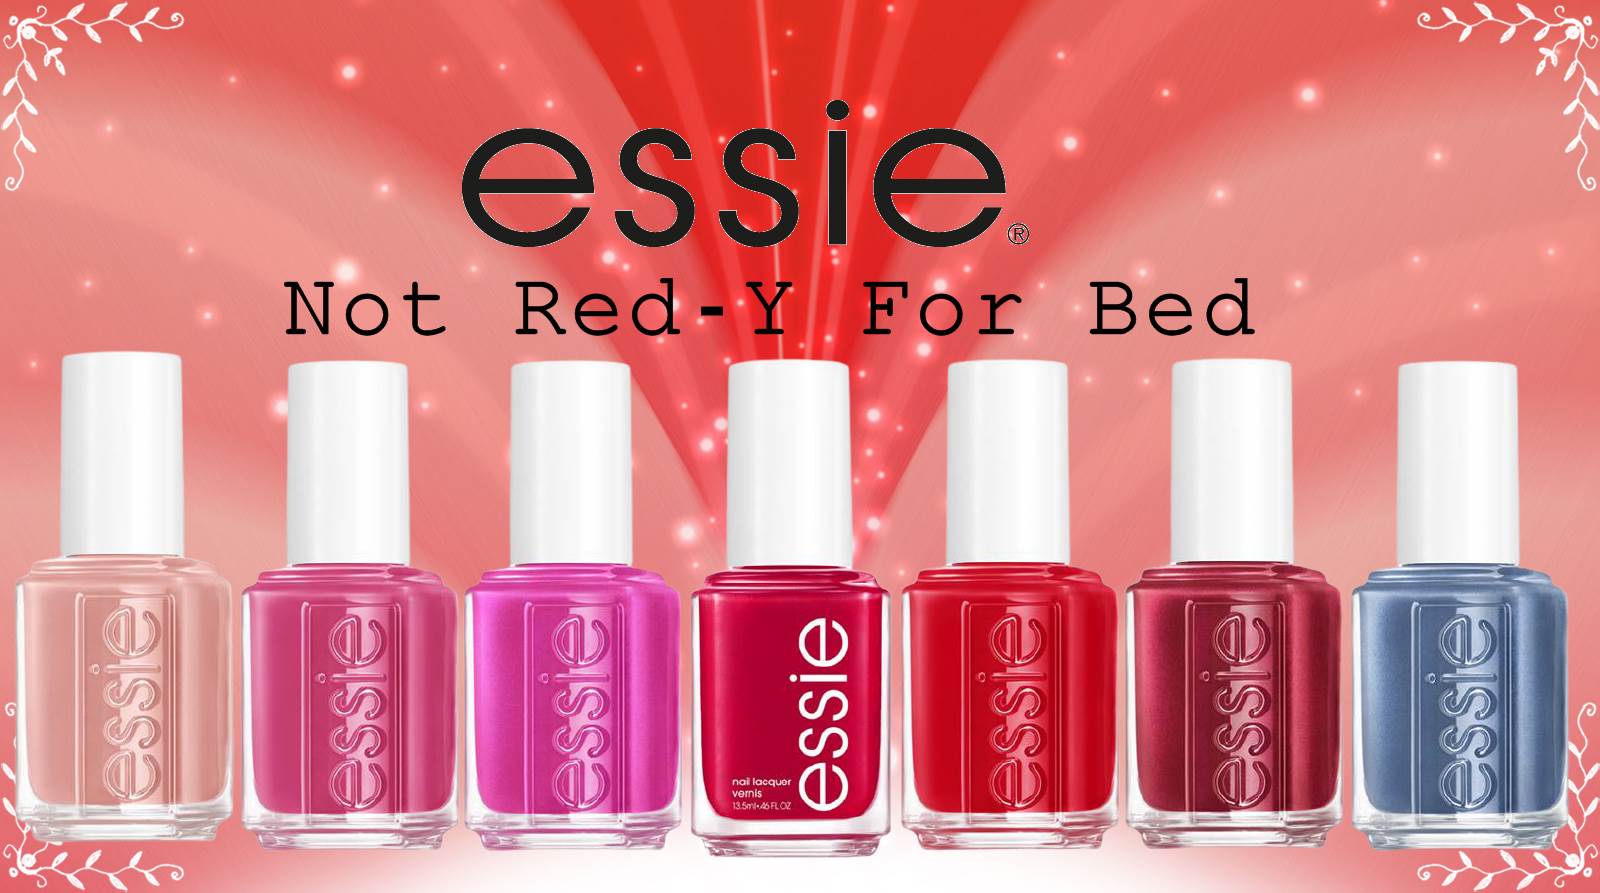 Essie Not Red-y For Bed Collection Review & Images – Essie Nail Polish | Nagellacke